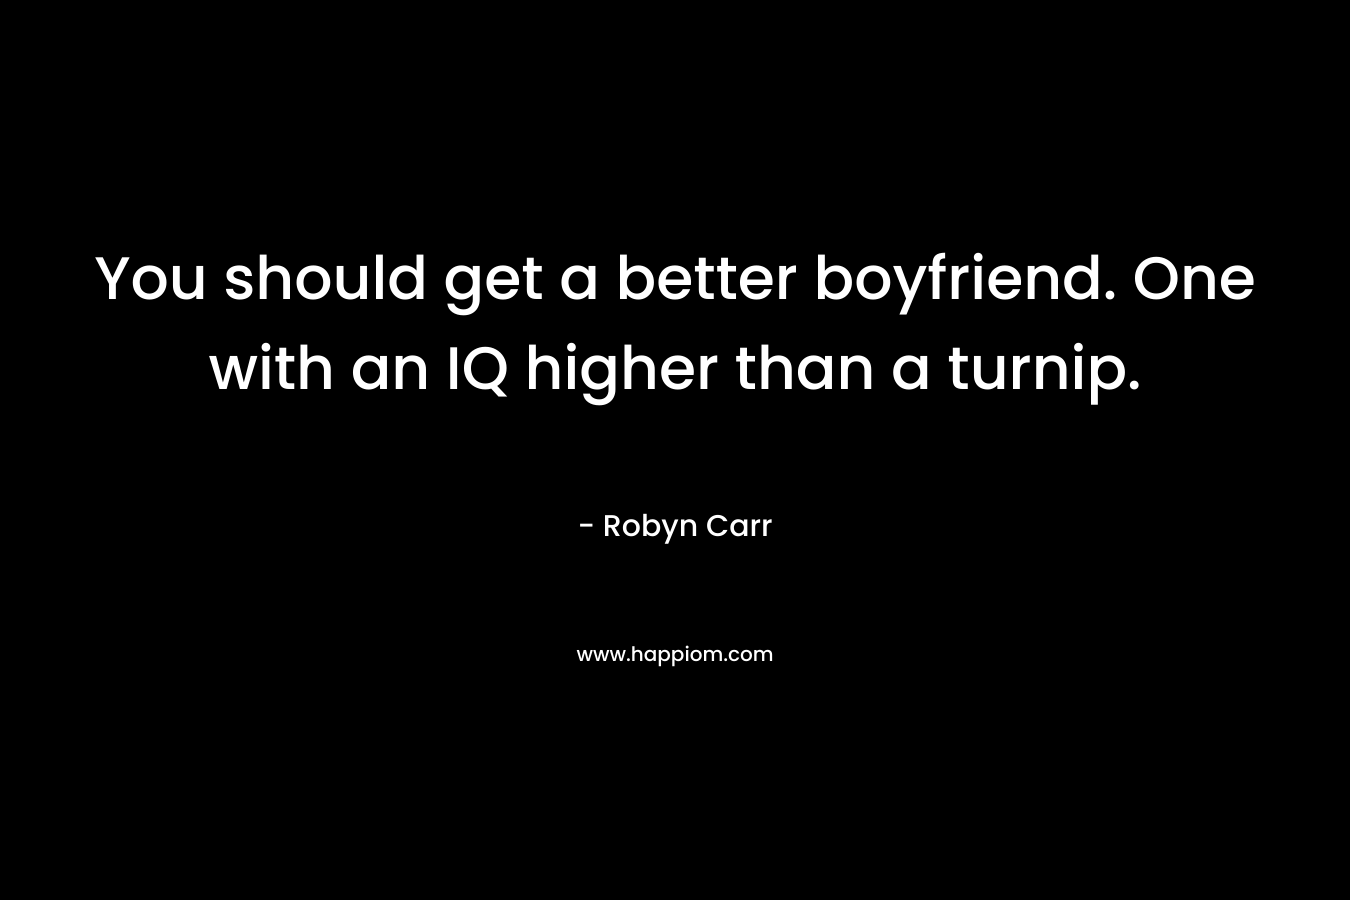 You should get a better boyfriend. One with an IQ higher than a turnip. – Robyn Carr